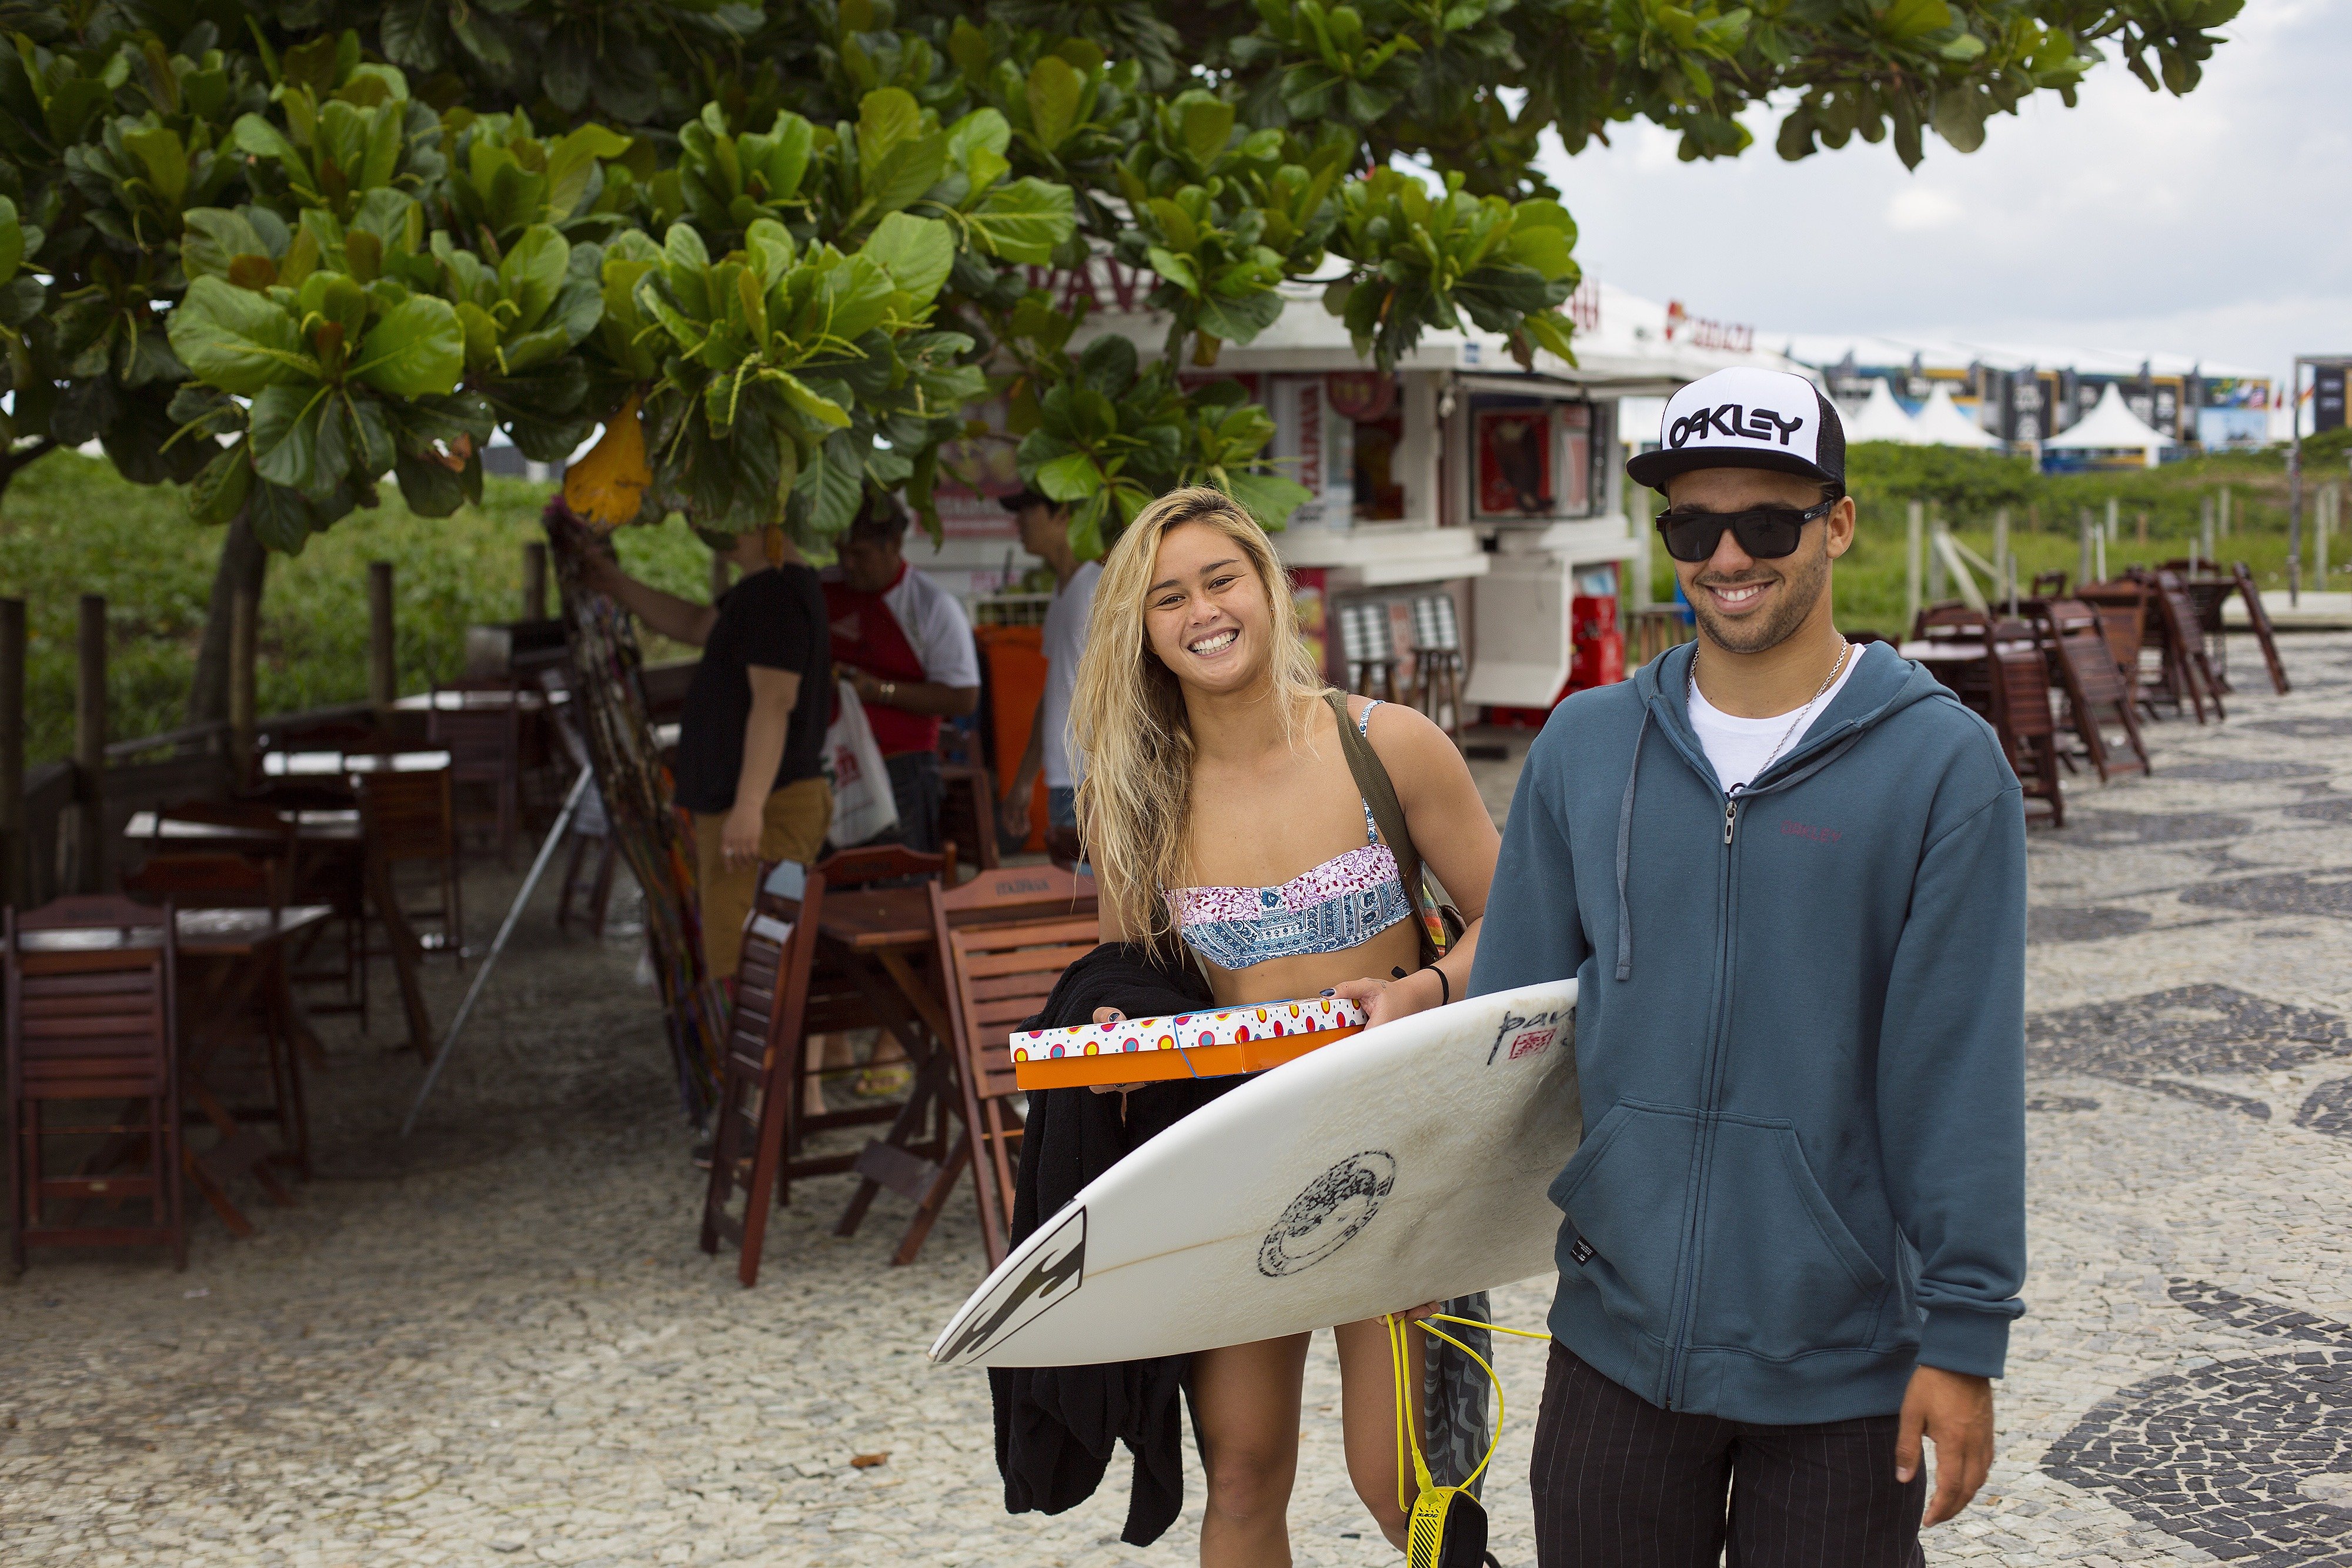 Alessa Quizon and Caio Ibelli at the Billabong Rio Pro on May 10, 2014, in Rio de Janeiro, Brazil | Source: Getty Images